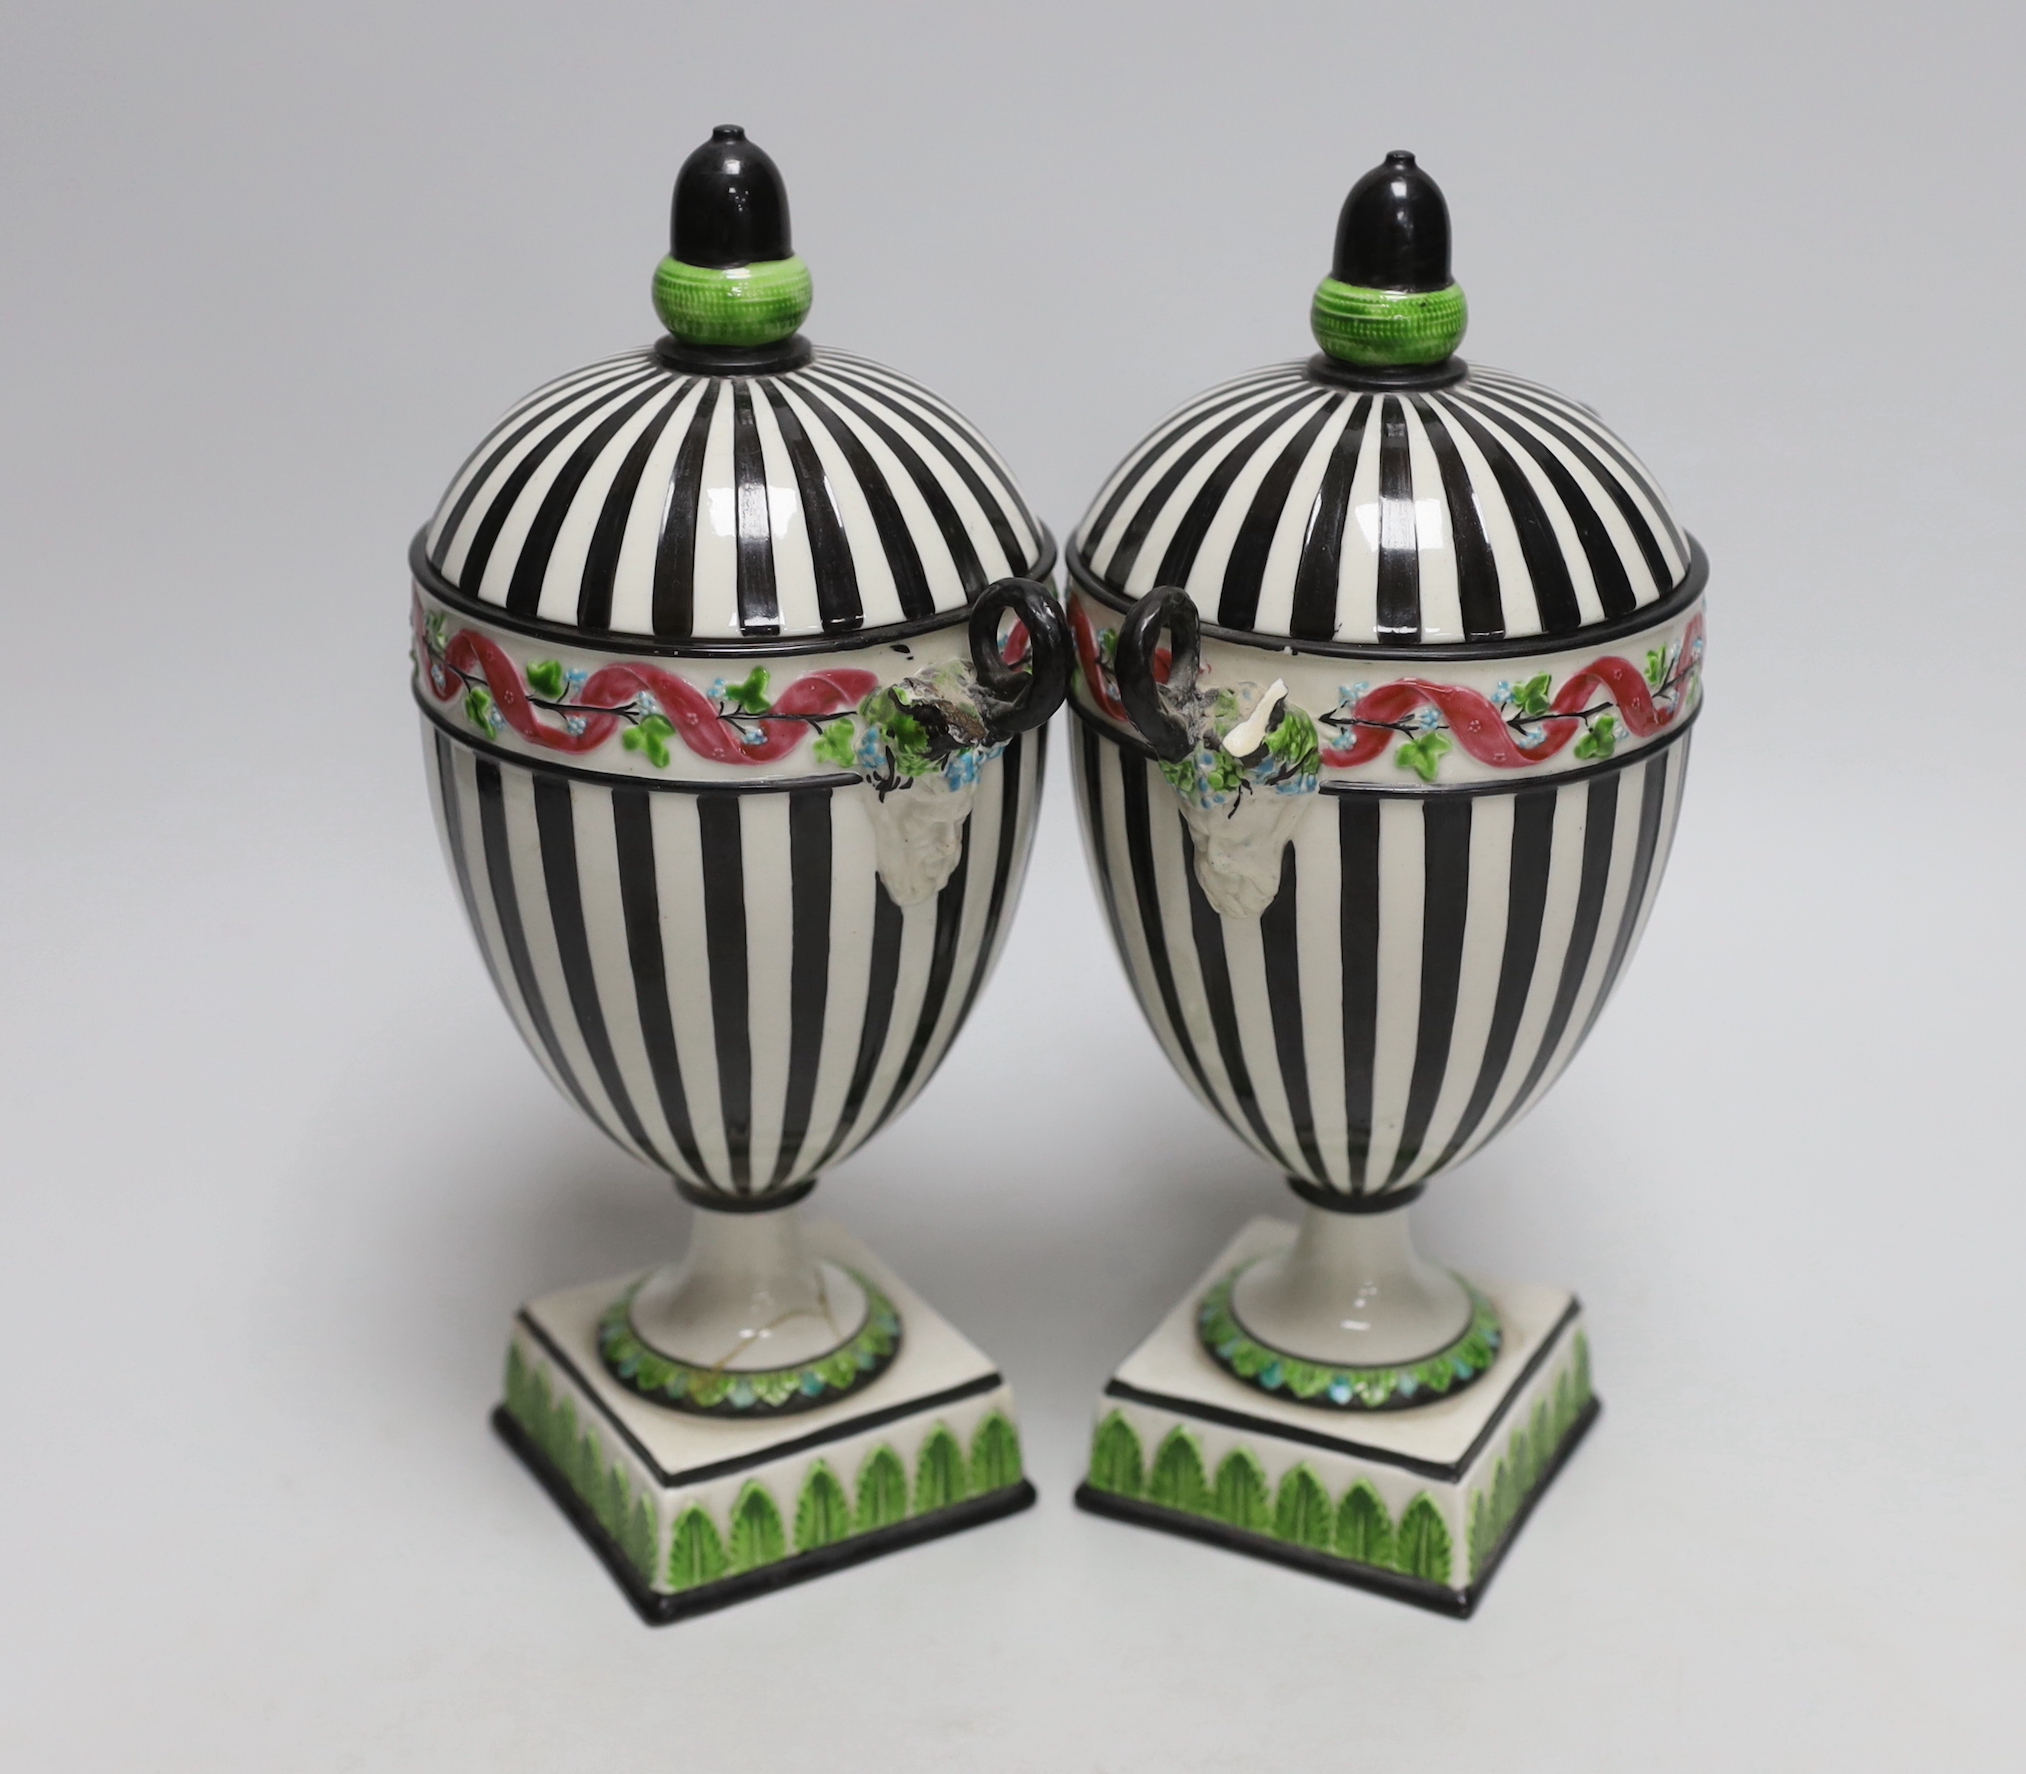 A pair of Wedgwood urns with twin handles and acorn design knops, each 22cm high